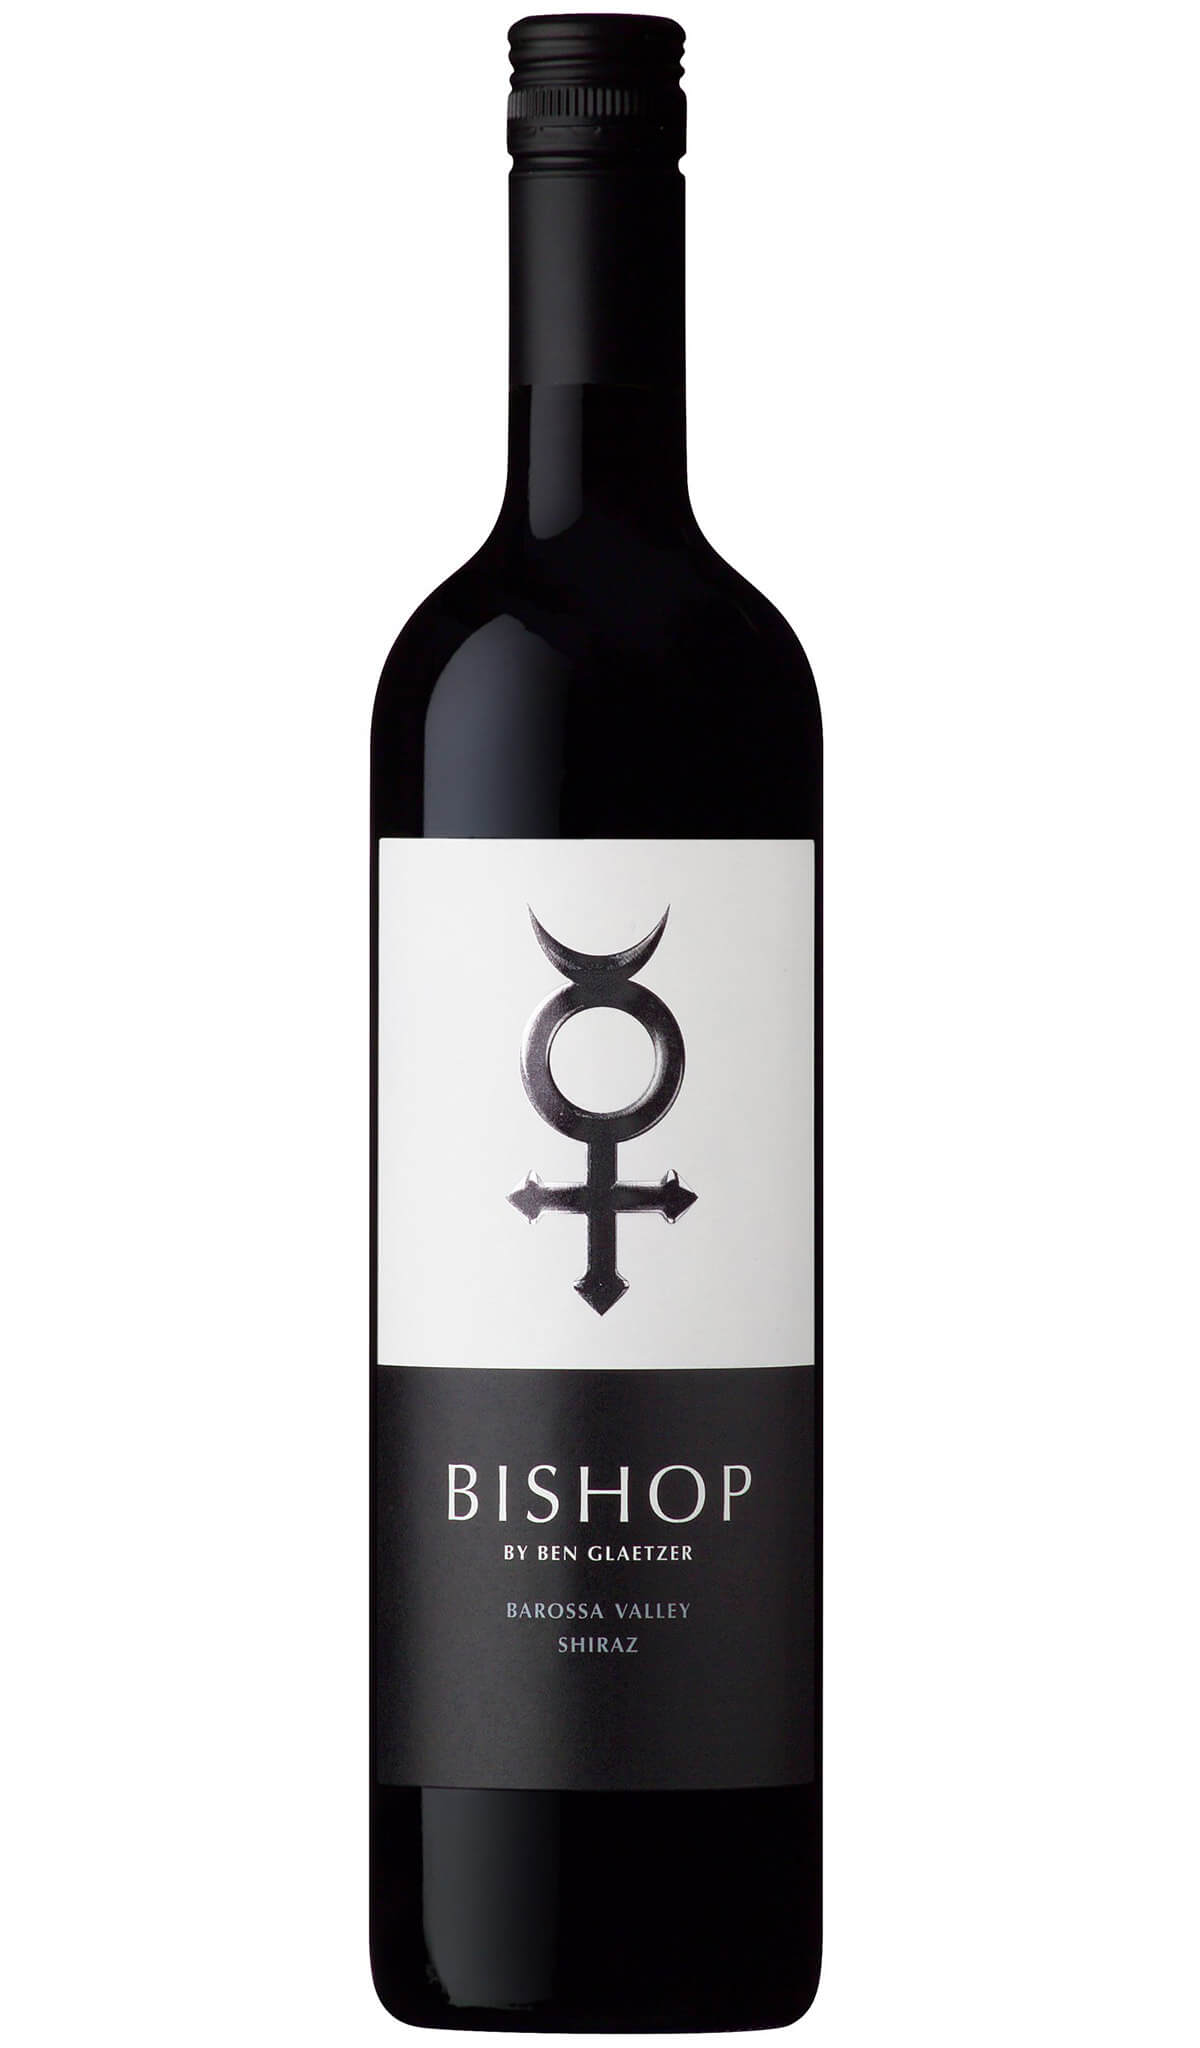 Find out more or buy Glaetzer Bishop Shiraz 2021 (Barossa Valley) online at Wine Sellers Direct - Australia’s independent liquor specialists.